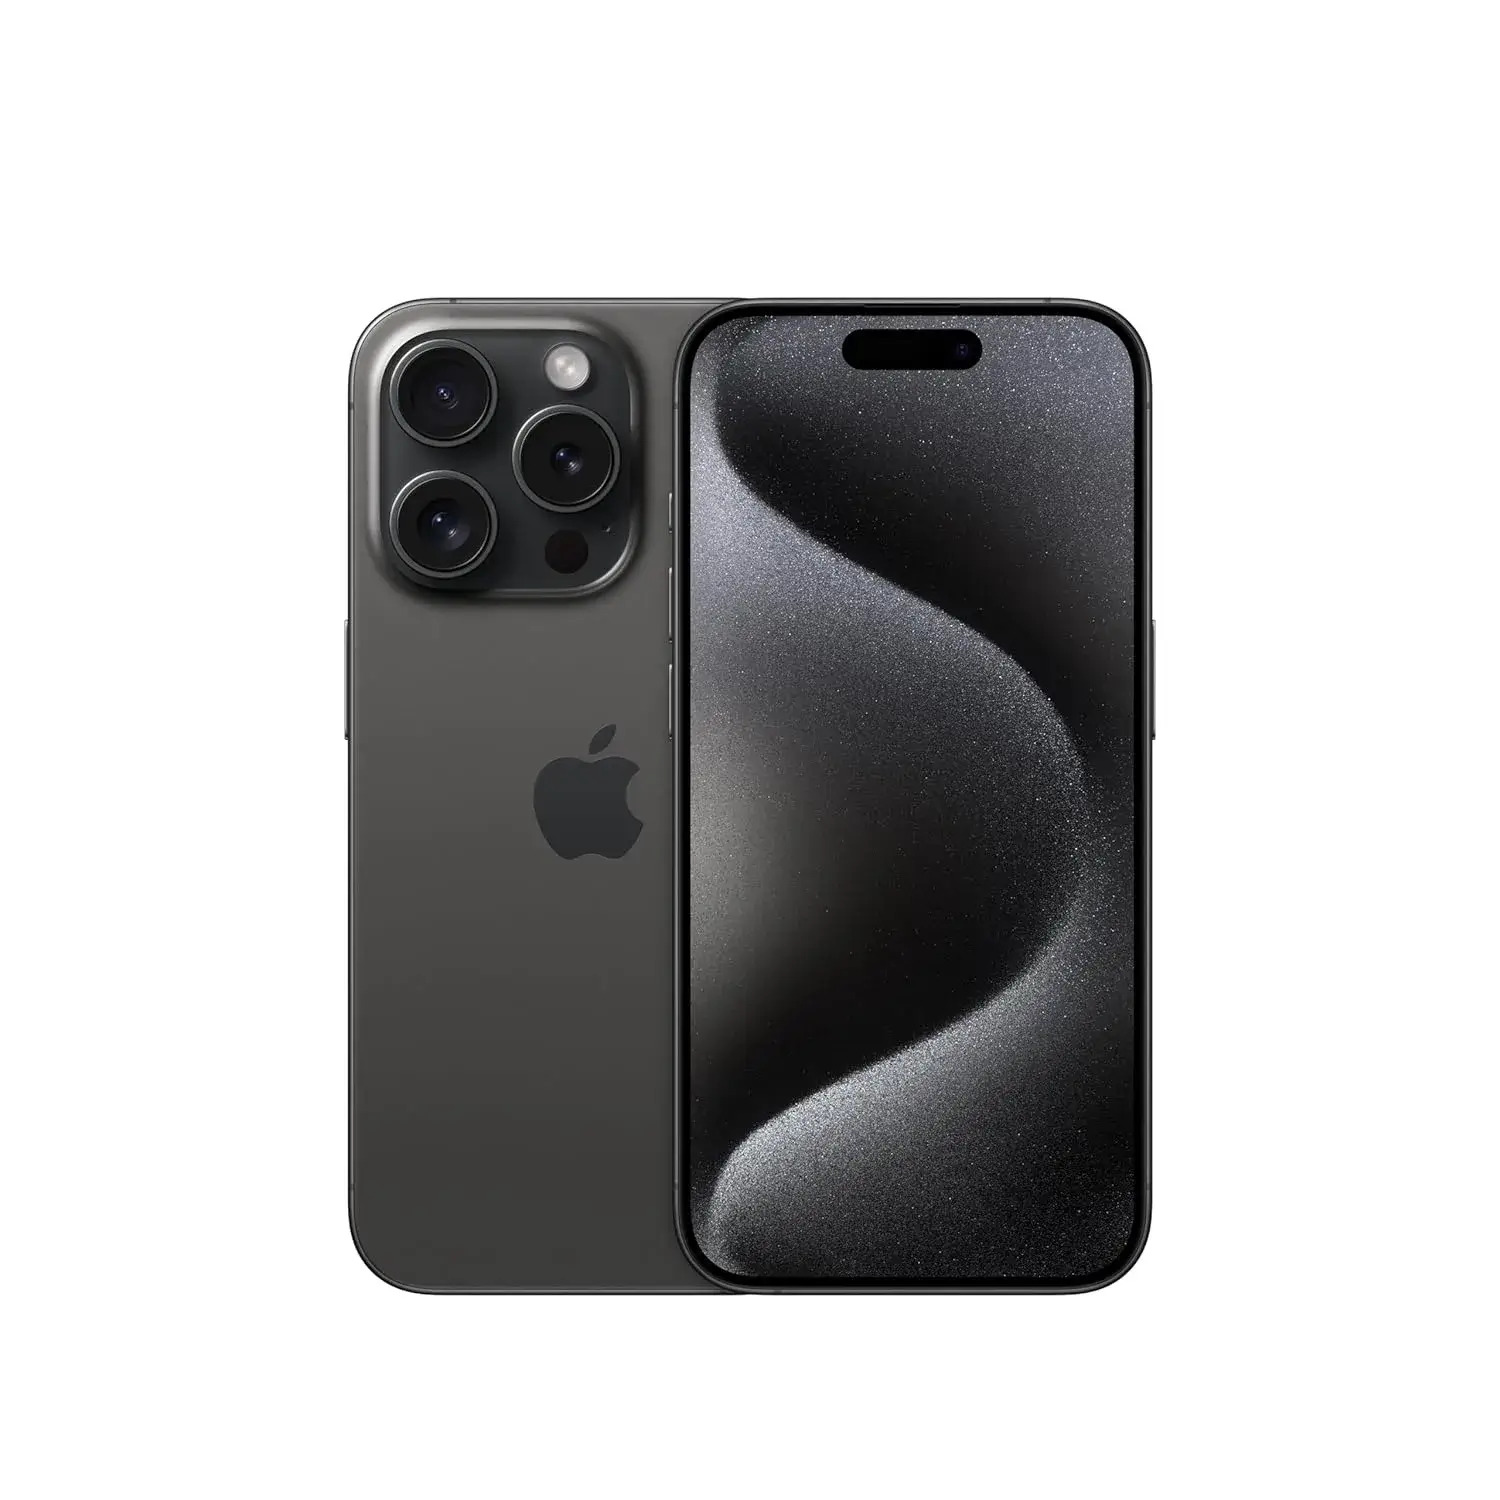 Apple iPhone 15 Pro (128 GB) Black Titanium Reviews | Price, Specification, Colours and Other Details